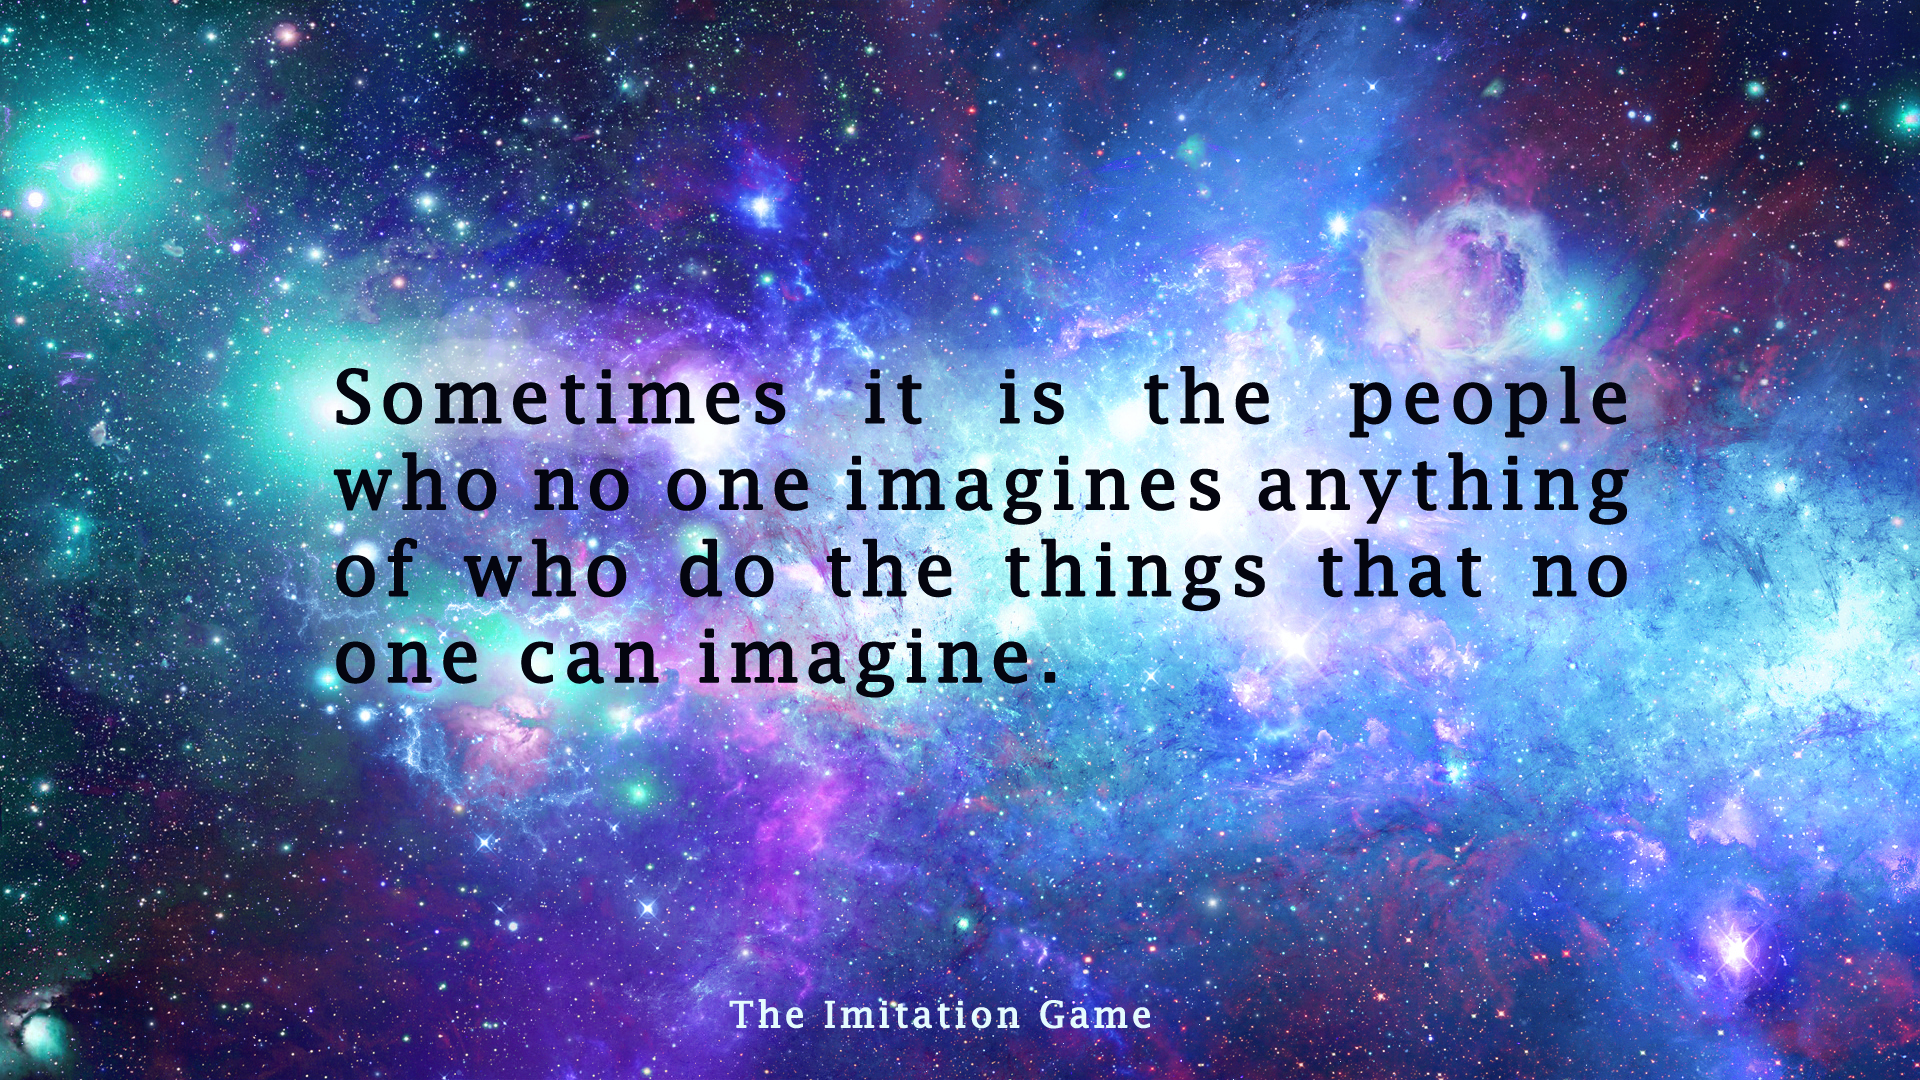 First imagine. Could one imagine. Картинки на тему Imitation. I can imagine anything. To use one's imagination.